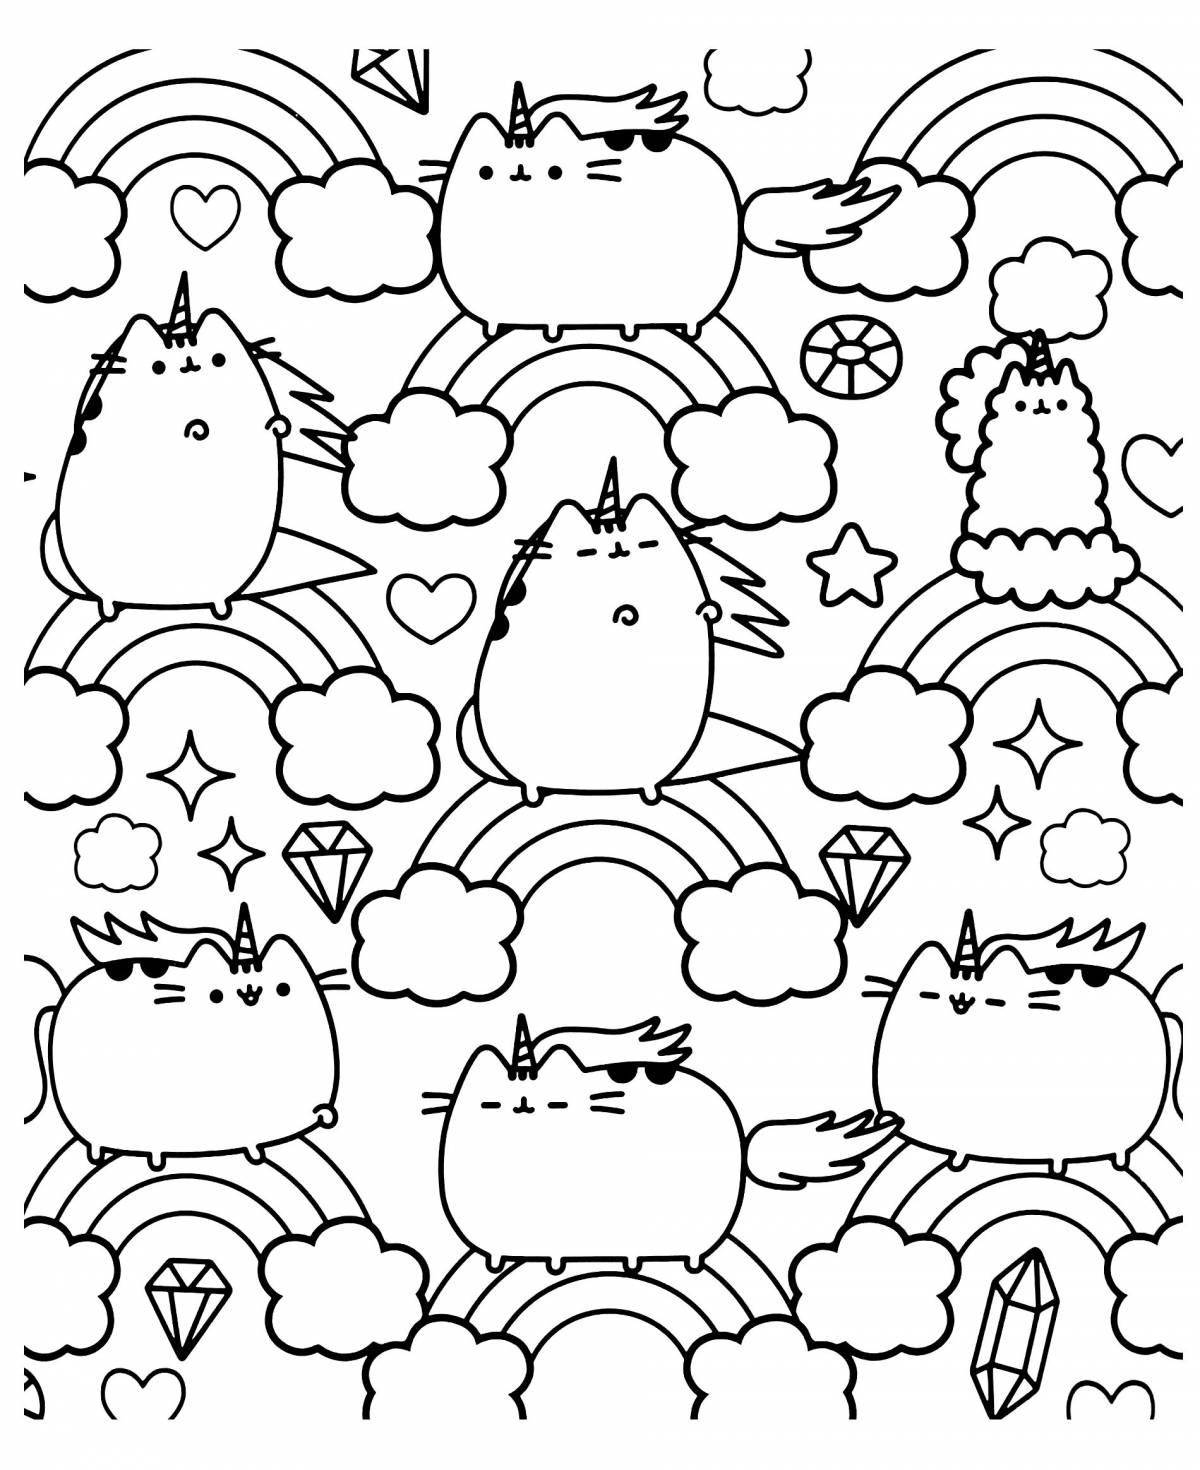 Coloring page adorable pusheen cat